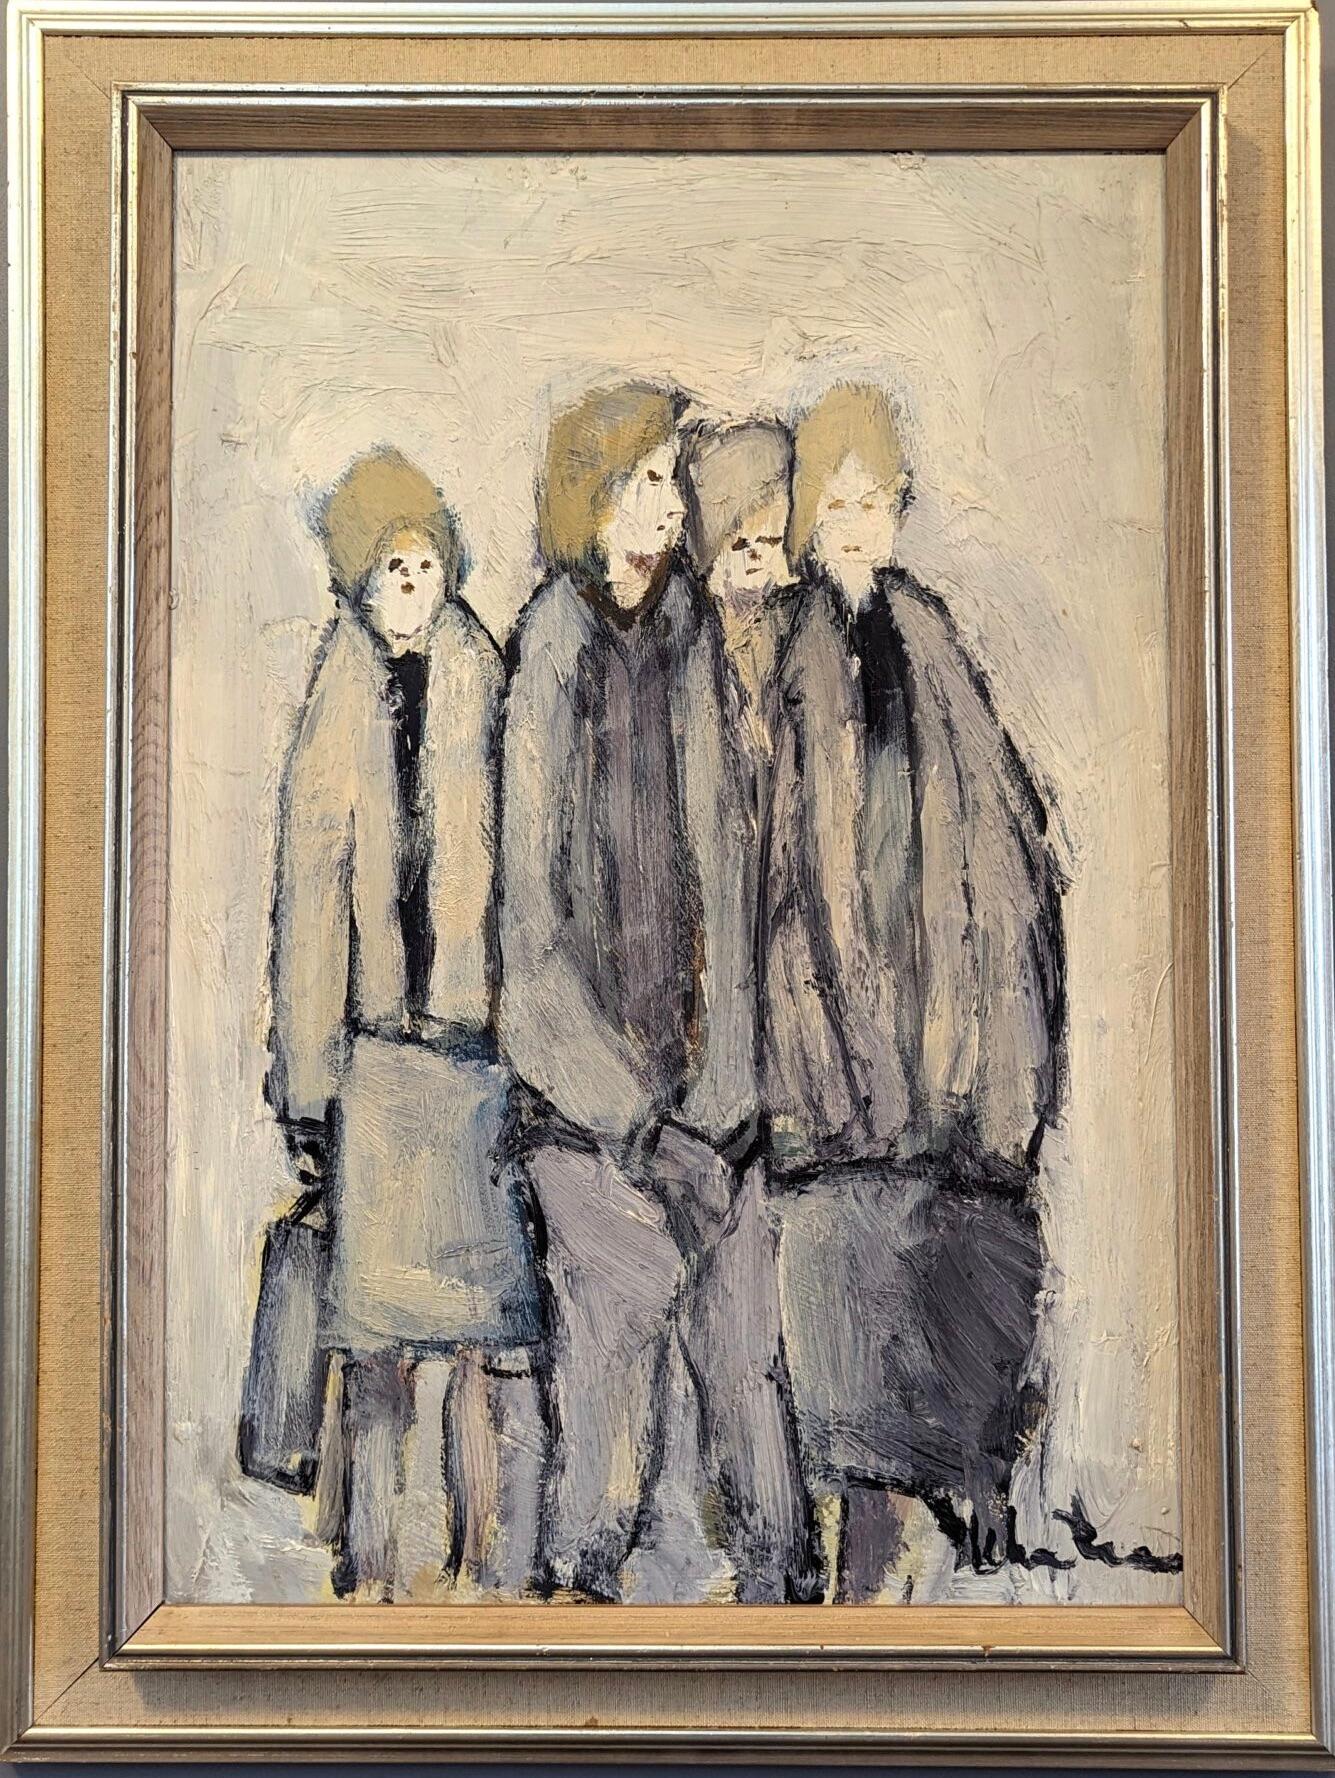 Unknown Figurative Painting - Vintage Mid-Century Modern Swedish Figurative Oil Painting - Bunch of Friends